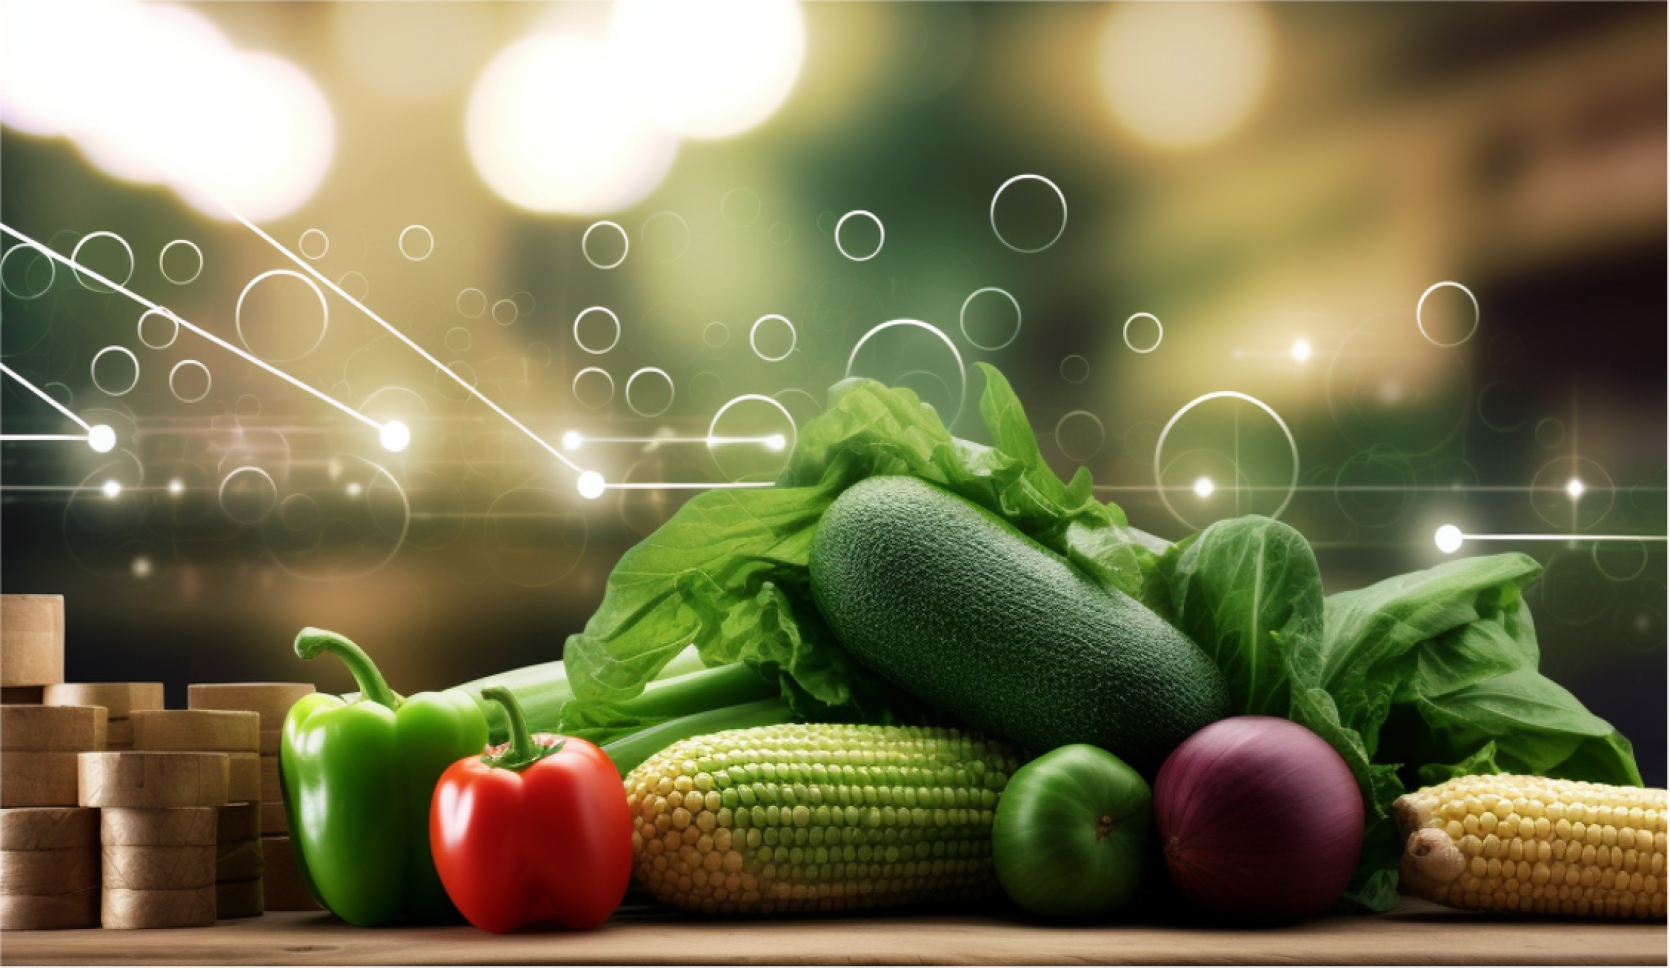 SUSTAINABLE STRATEGIES WILL DRIVE THE 2023 FOOD INDUSTRY